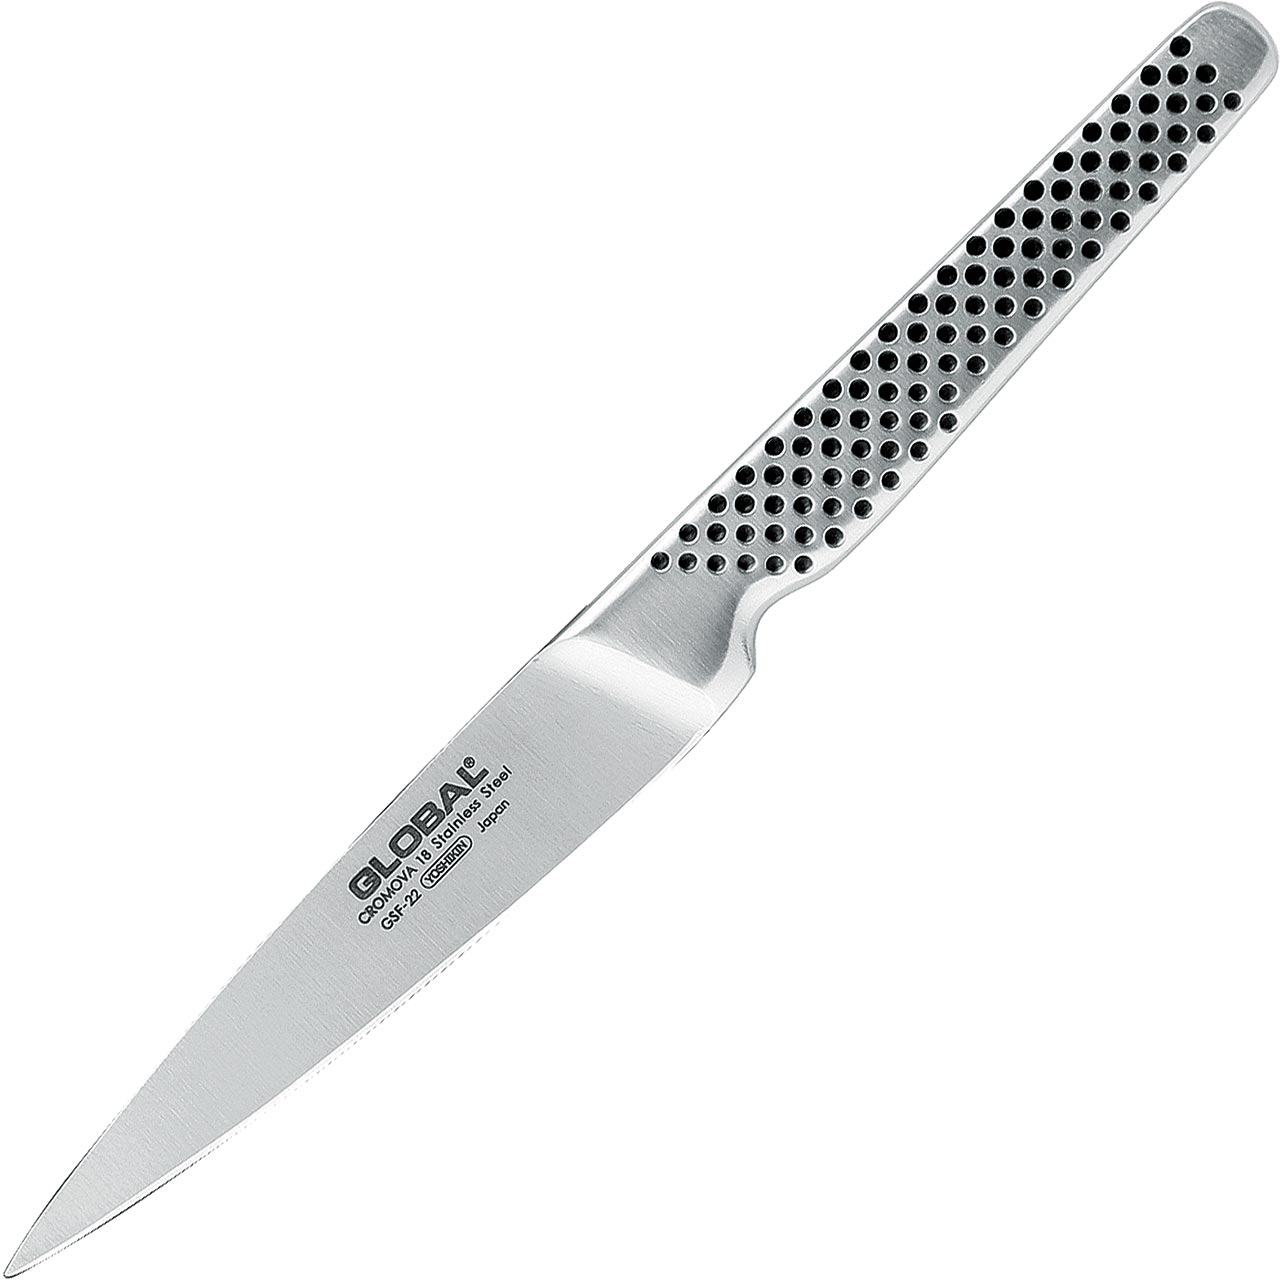 GSF-22 Forged Utility Knife 11cm